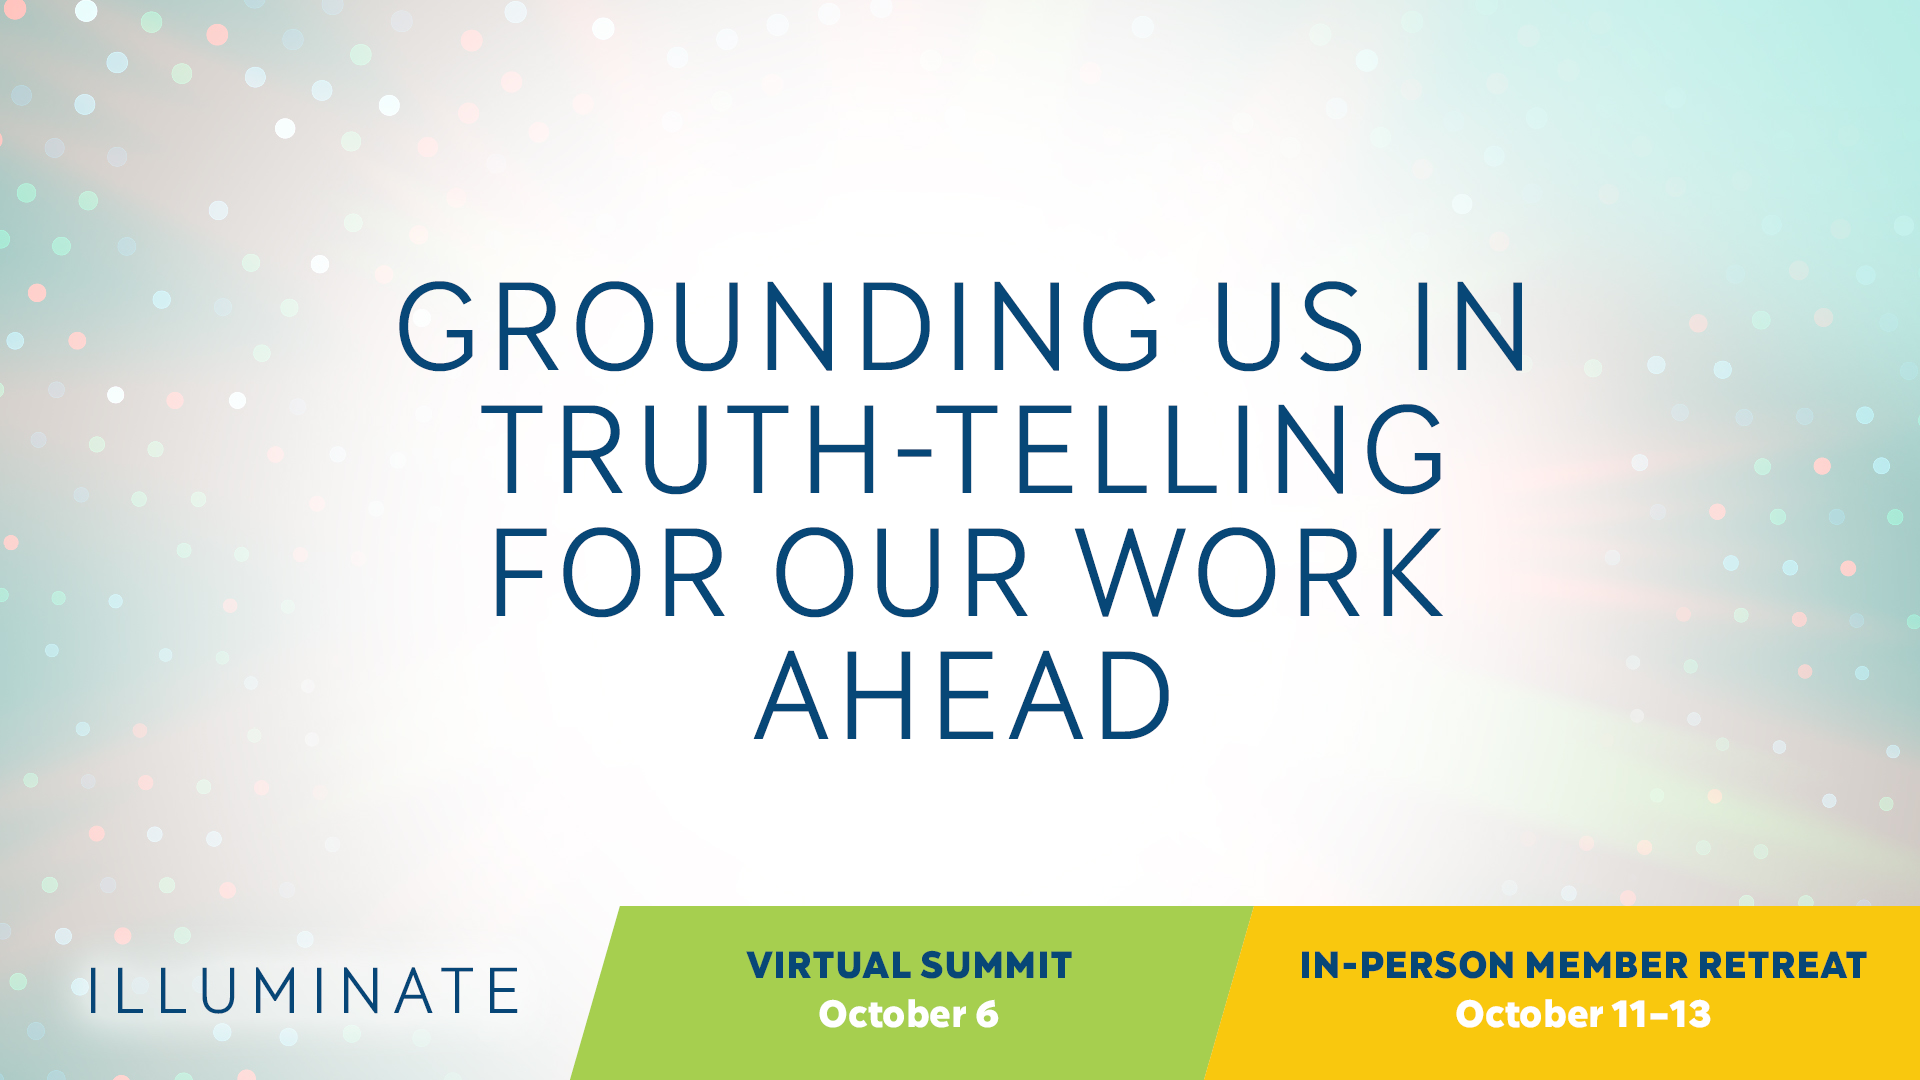 PNW22 Illuminate graphic that says "Grounding Us in Truth-Telling for Our Work Ahead" in denim blue letters. Across the bottom a green and yellow border says "Virtual Summit, October 6 | In-Person Member Retreat, October 11-13"